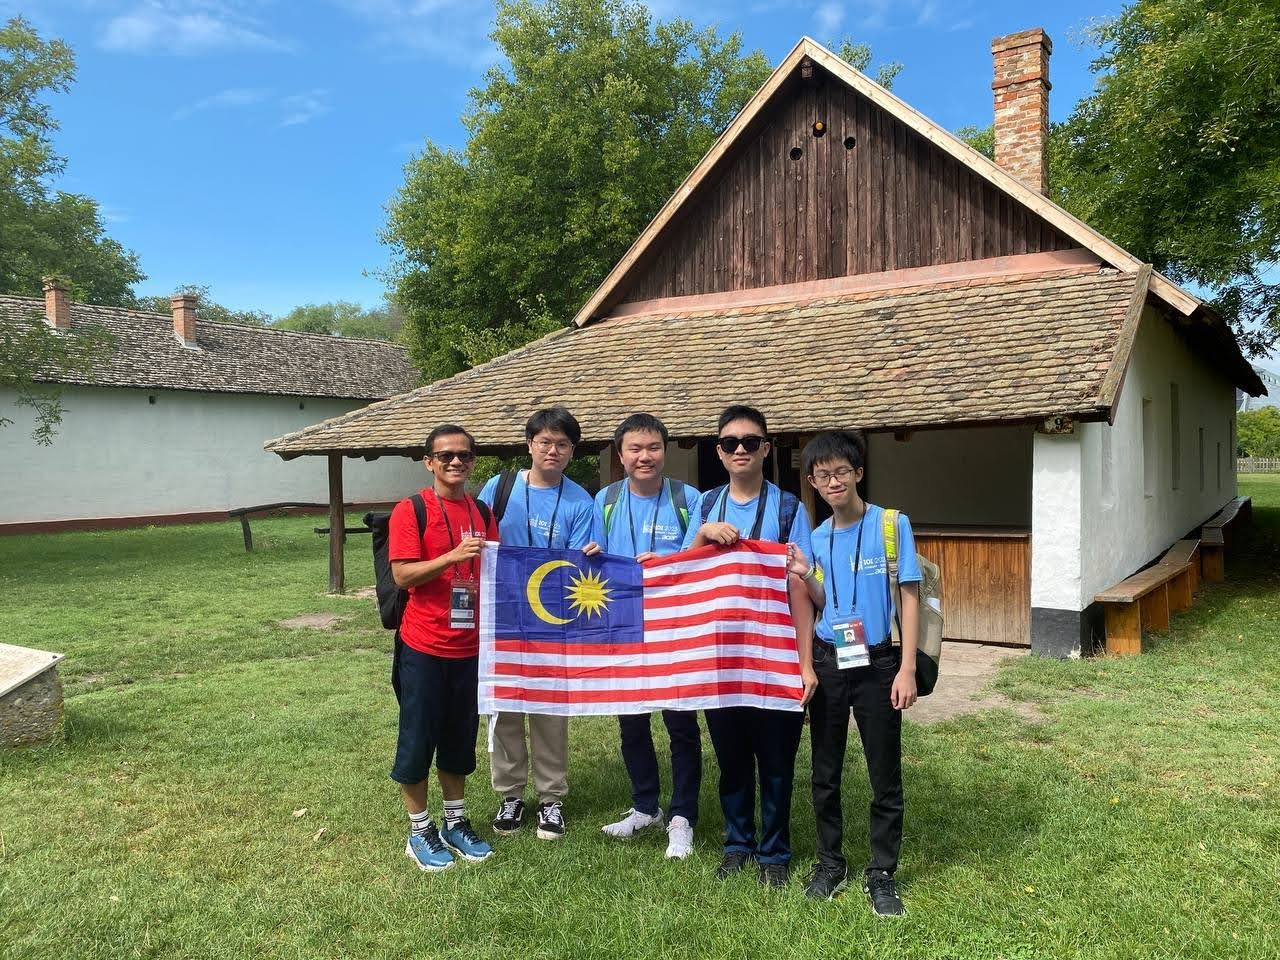 Group photo in front of a hut. Happy Malaysia Day!